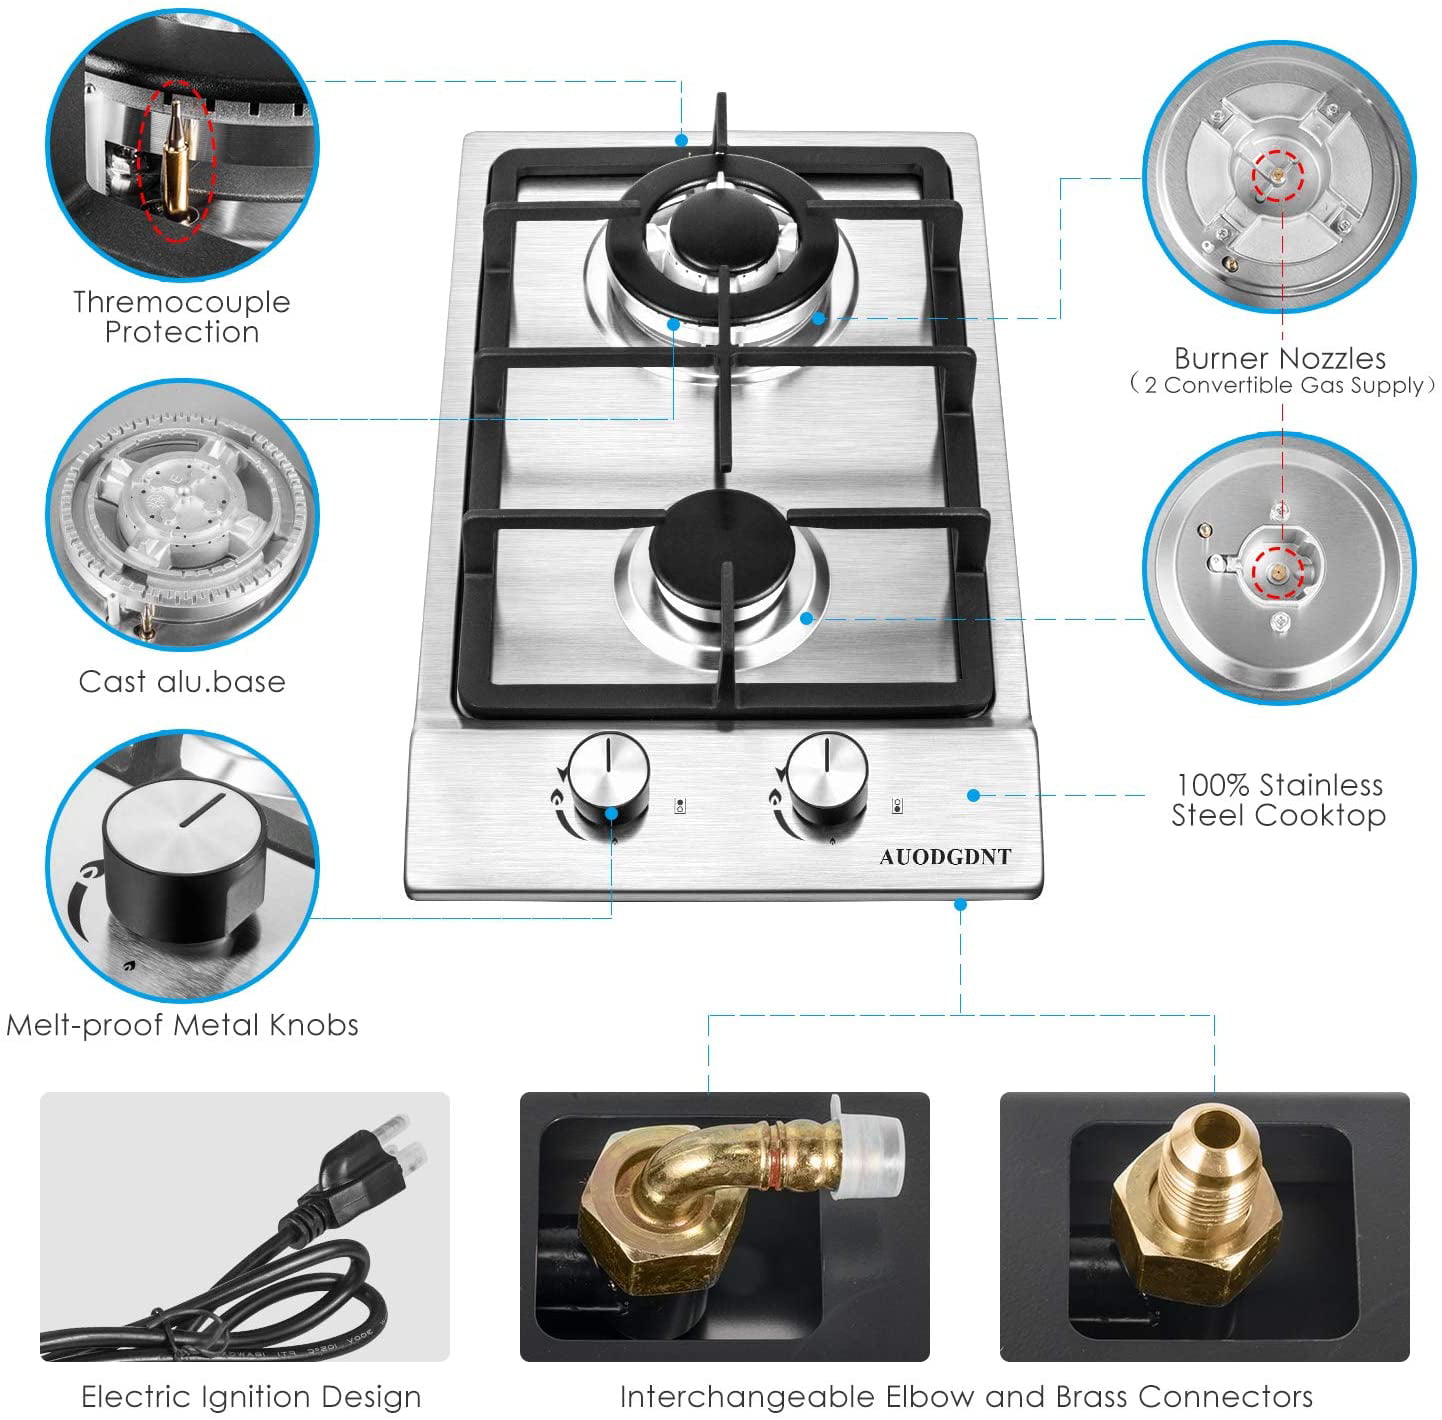 LPG/NG and Easy to Clean for RVs Gas Cooktop 2 Burners with 1.5 Volt Battery Outdoor Dual Fuel Gas Hob Apartment 12 Inch Portable Gas Stove Top in Stainless Steel 